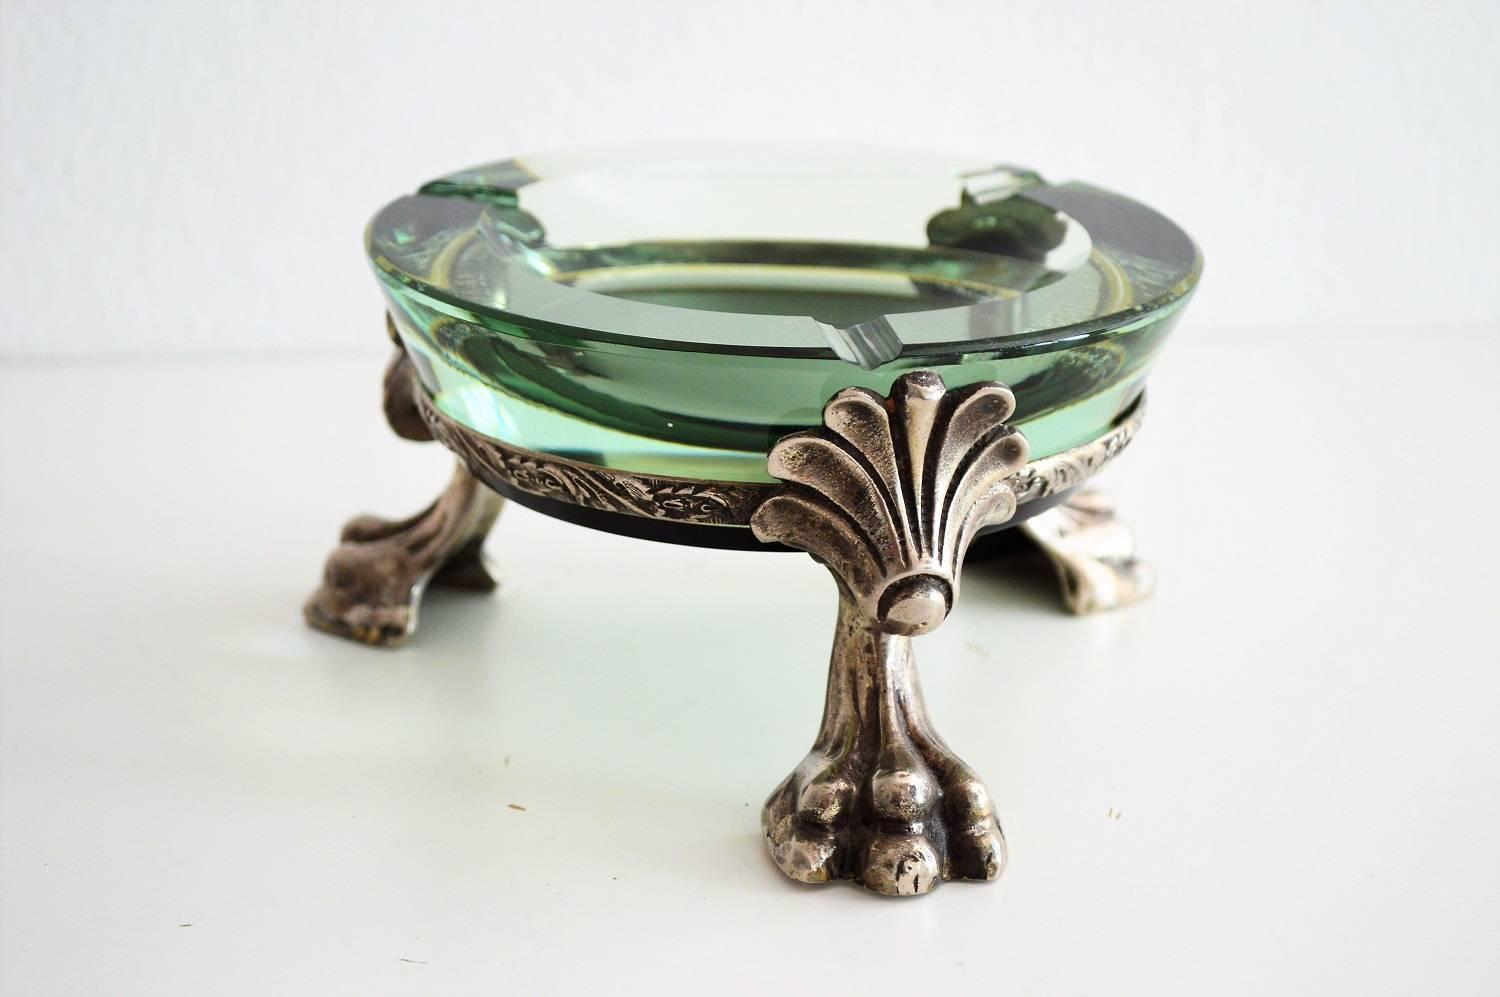 Gorgeous ashtray in dark green color with yellow inclusion made of crystal glass.
The glass is hold by a metal holder with three lion paws in the neo-renaissance style.
Beautiful piece in excellent condition.
 